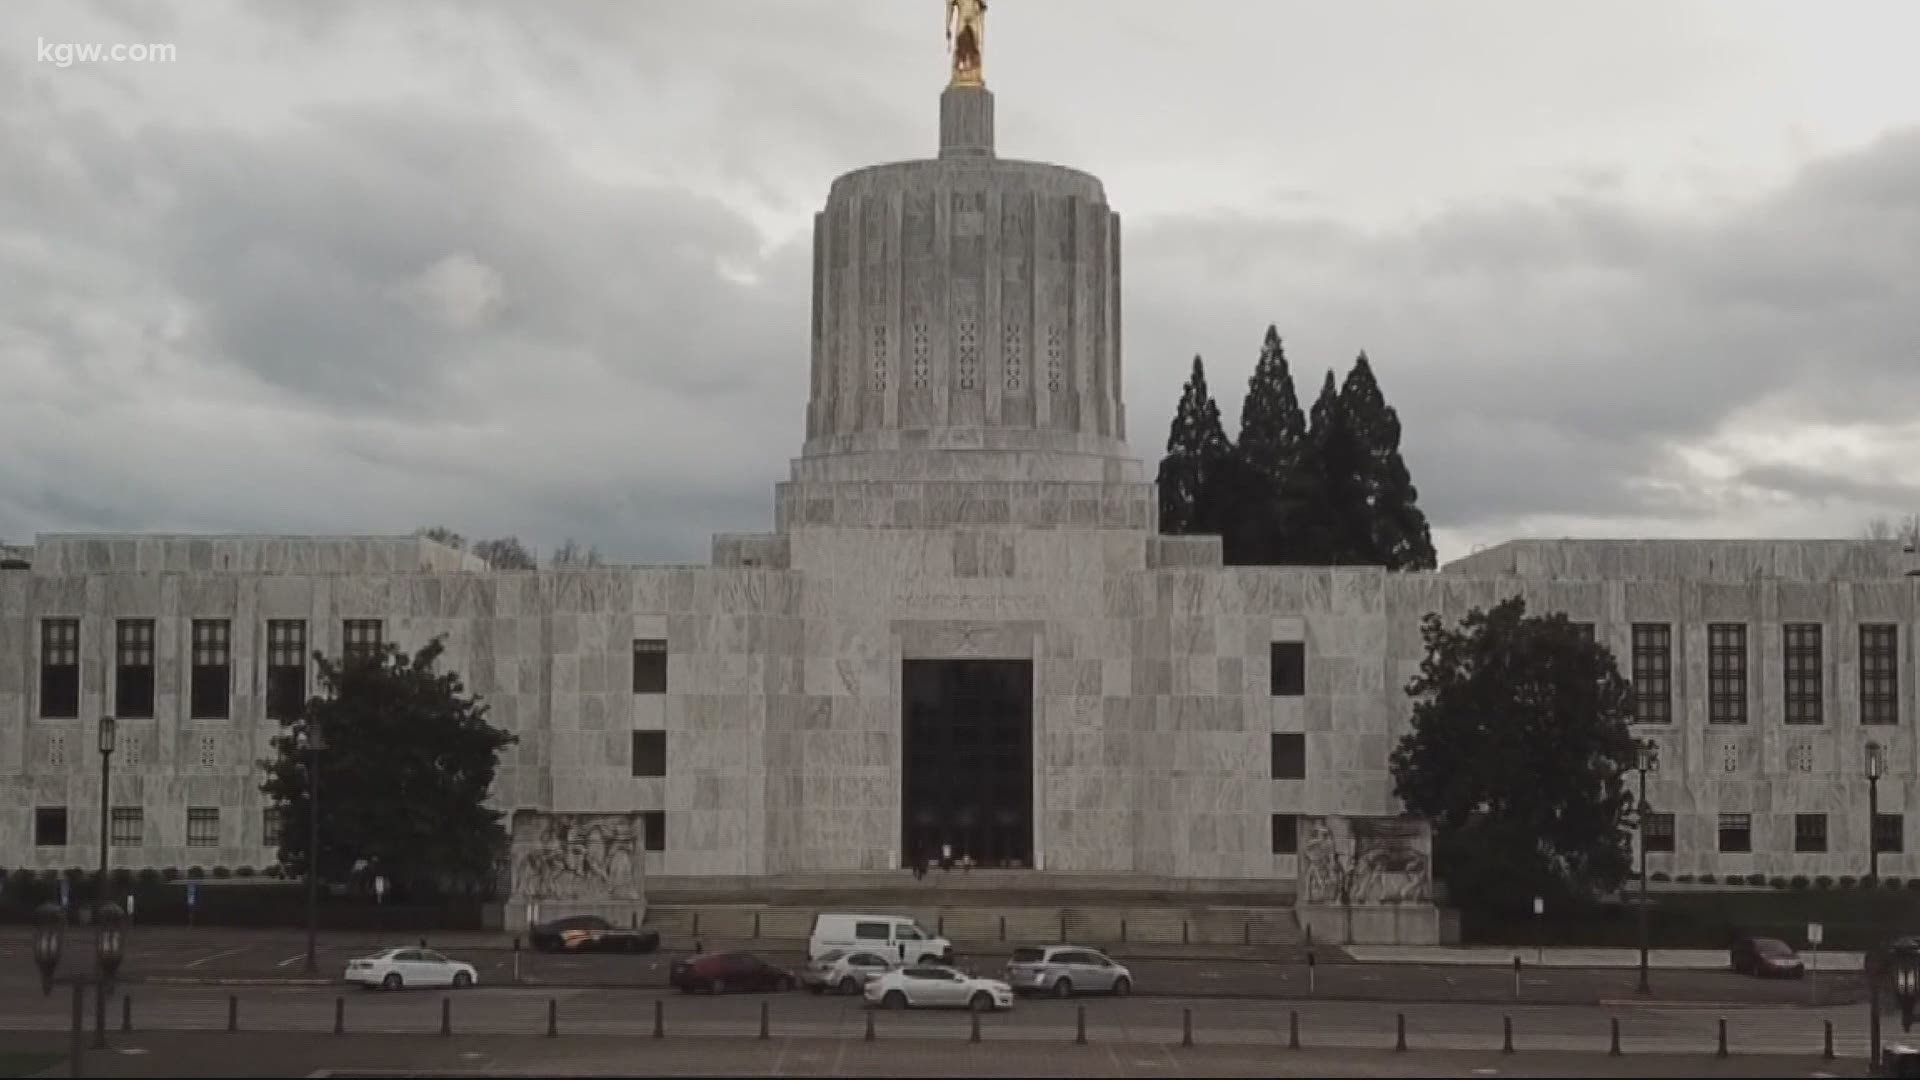 The special session was convened to pass pandemic and wildfire relief for Oregonians.